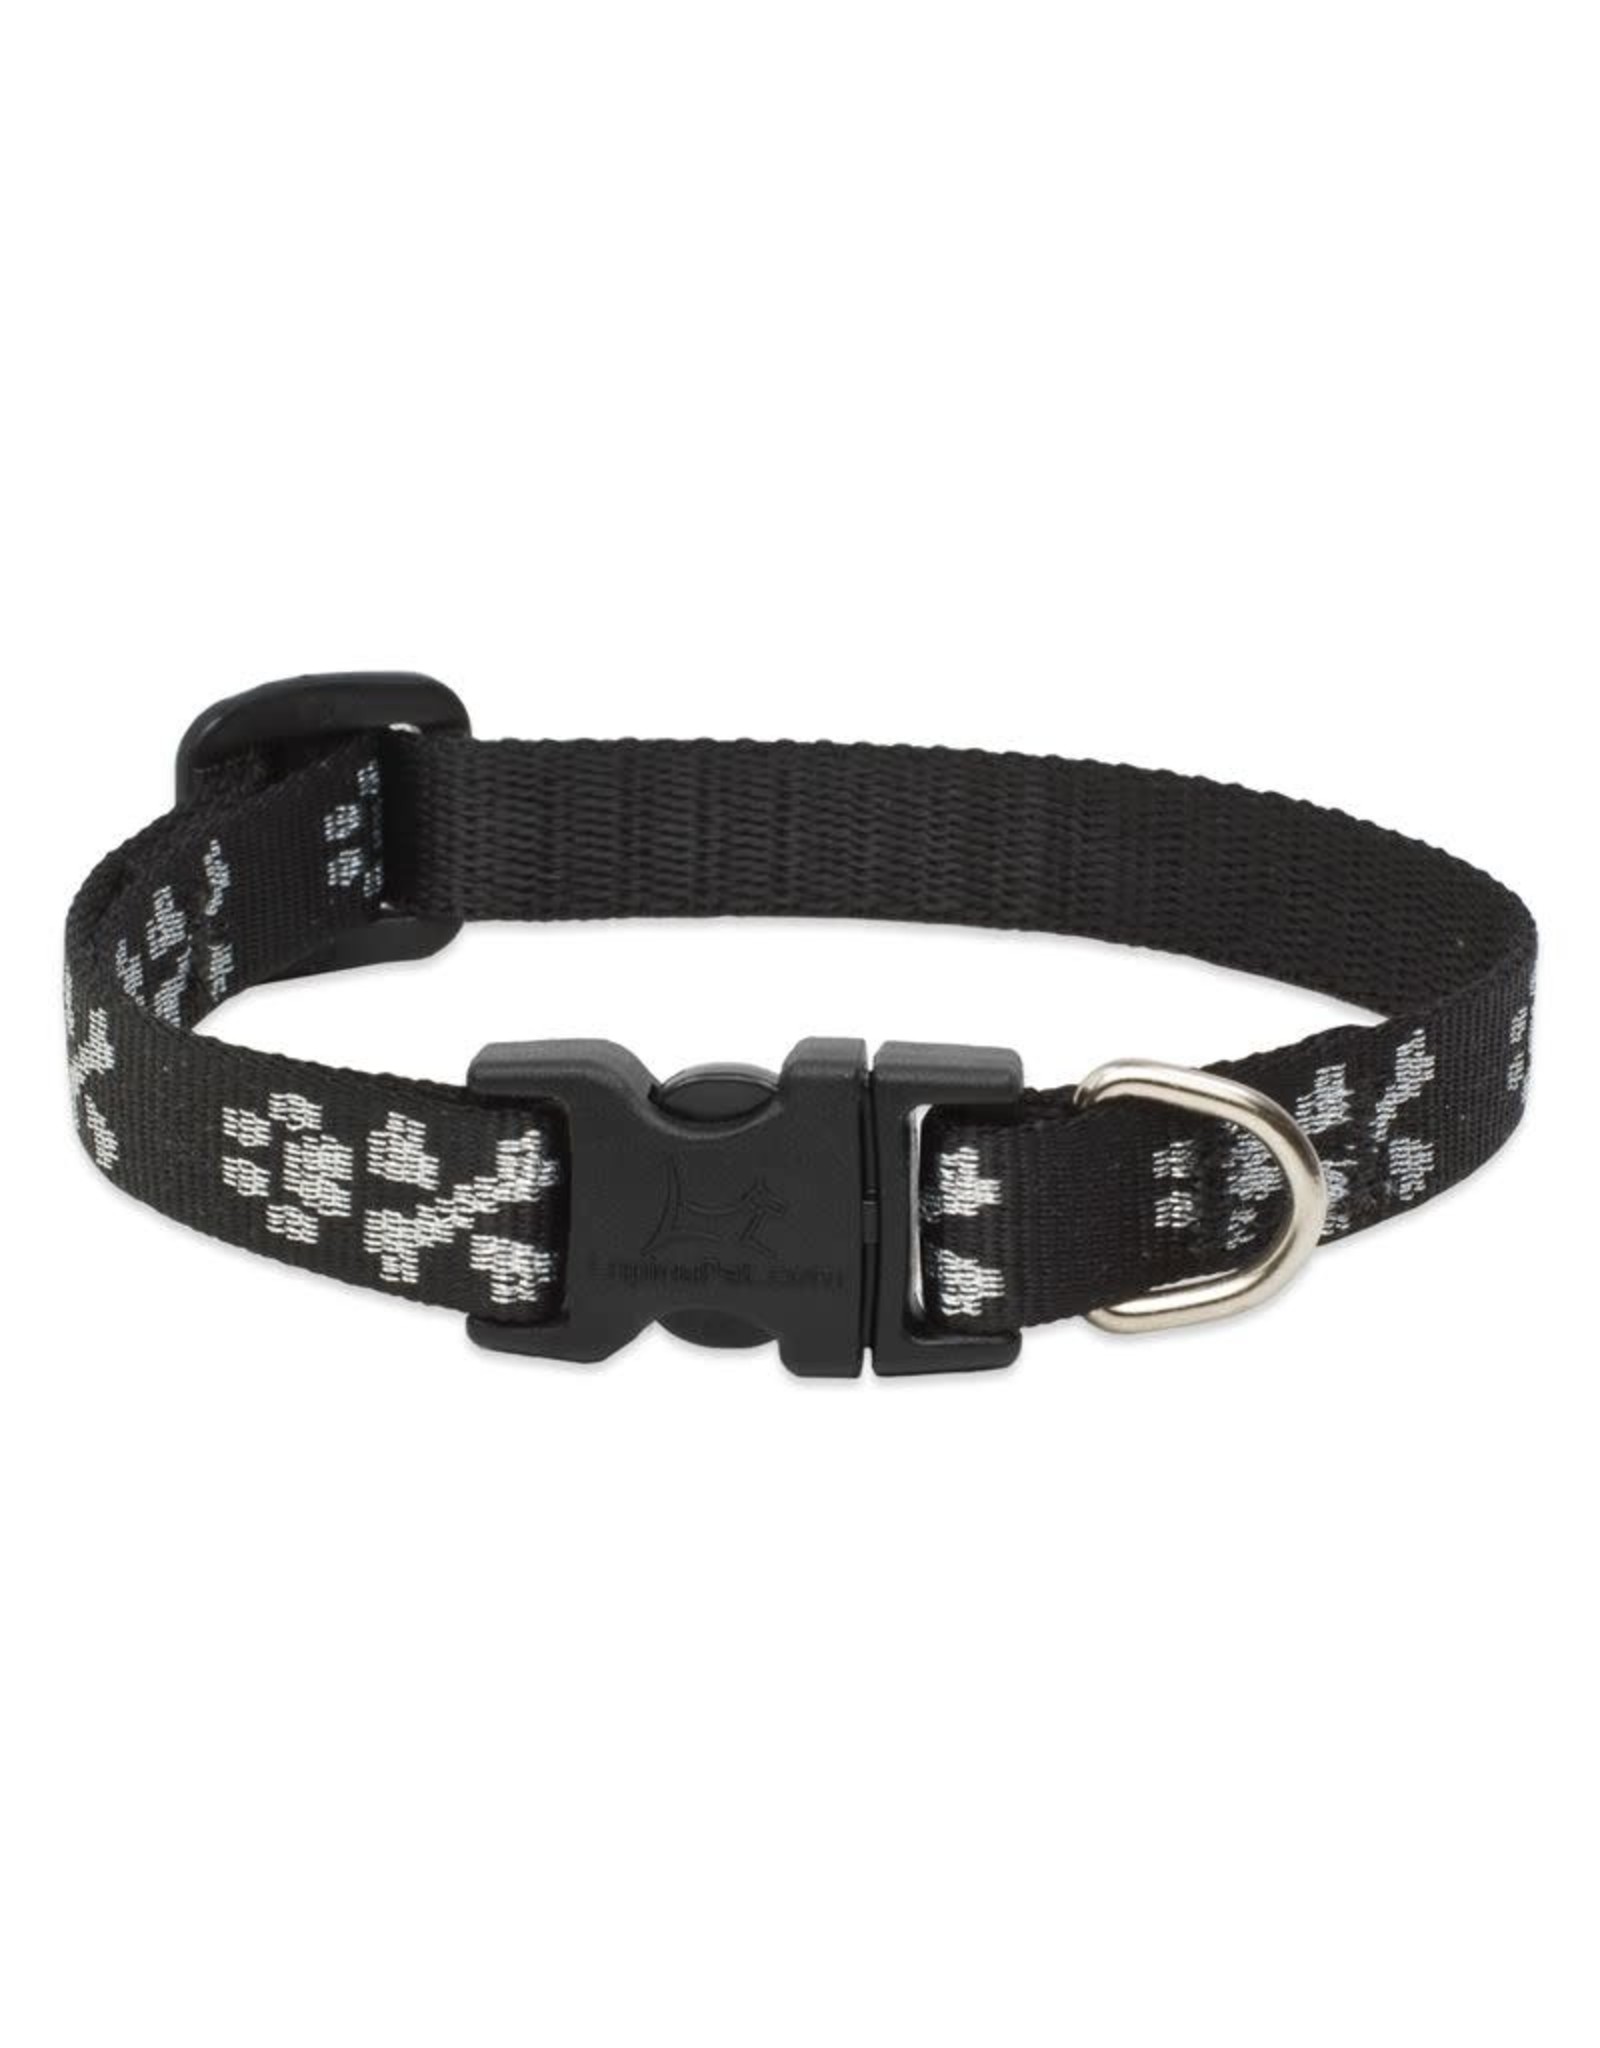 Lupine Lupine Bling Bonz Collar: 1 in wide, 16-28 inch